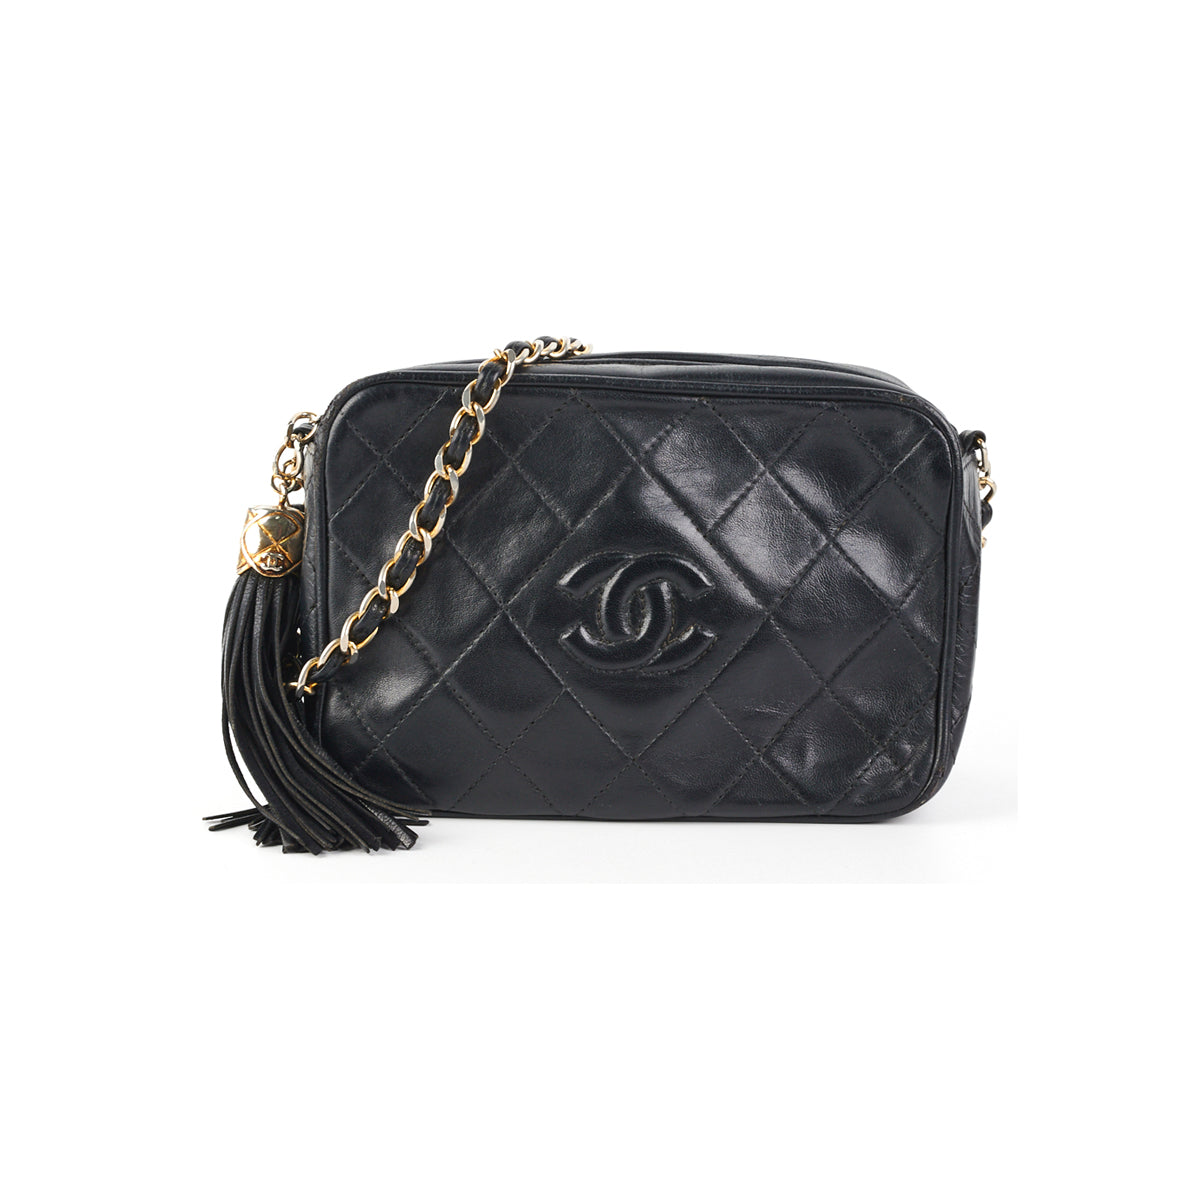 Sold at Auction: Chanel: A Black Lambskin LAX Accordian Camera Bag, 2005 /2006